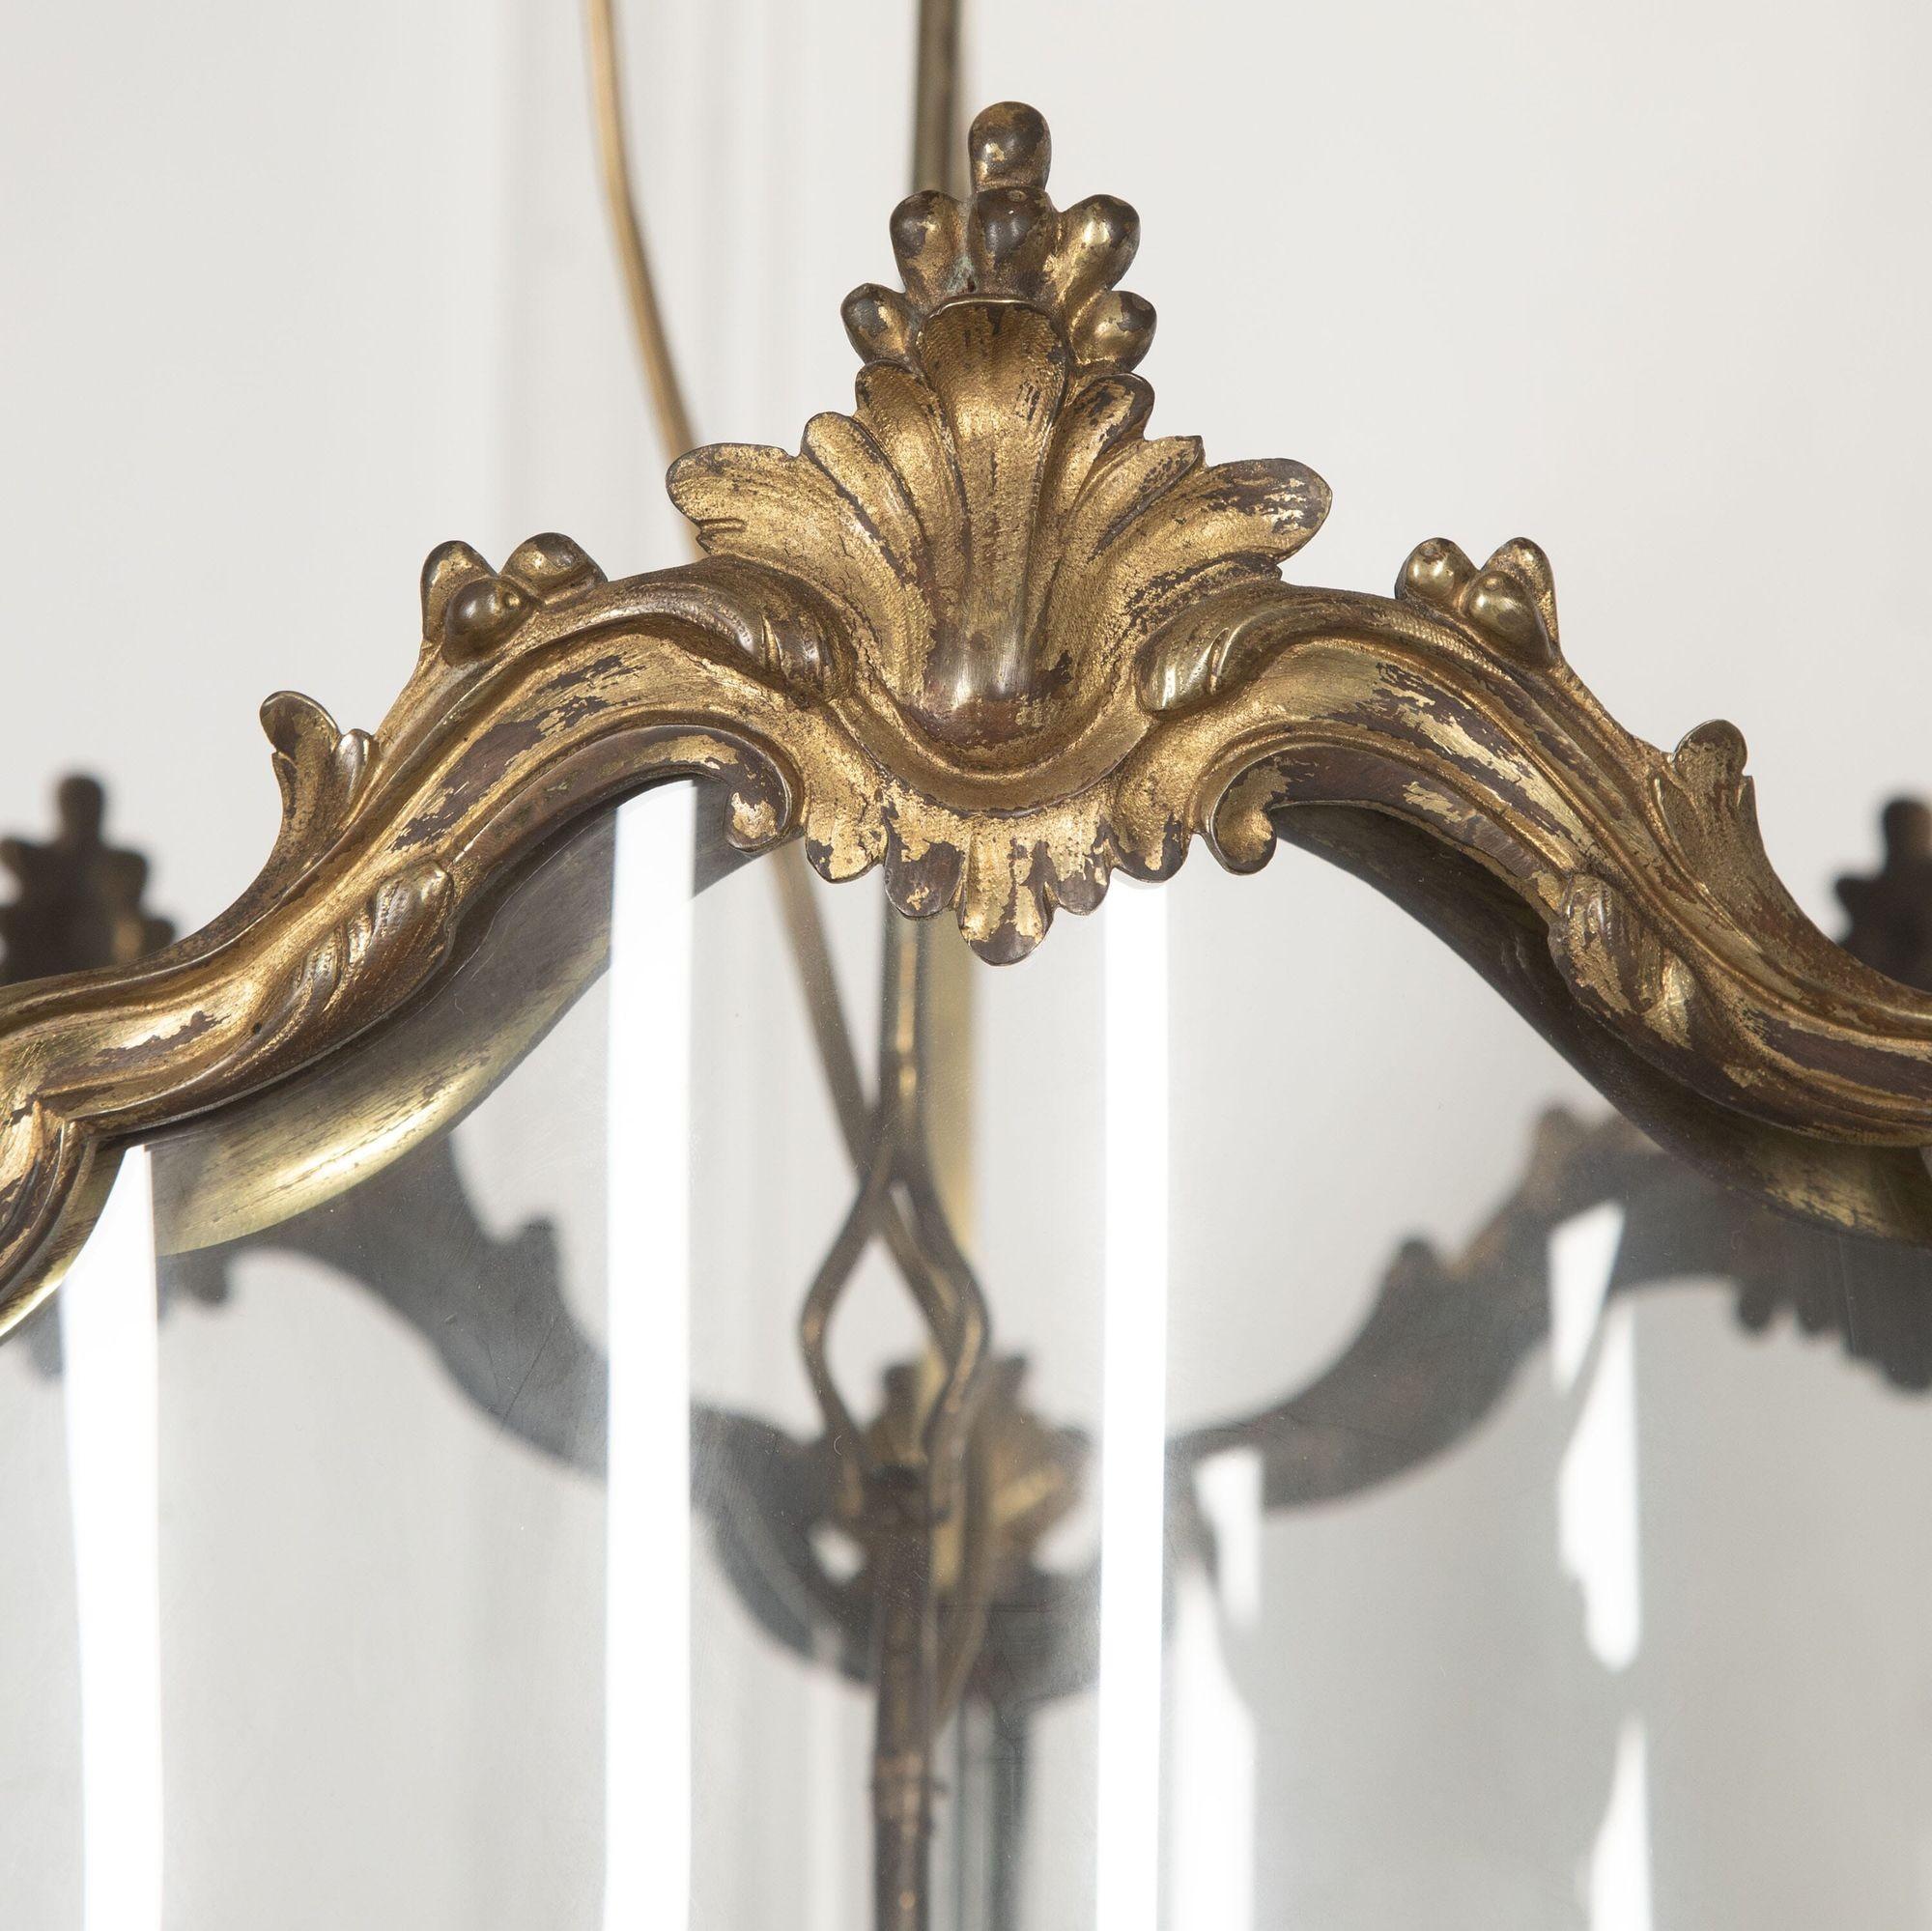 Large 18th century English gilt bronze hall lantern with a finely cast frame of serpentine form.
The curved glass panels are headed by chased acanthus leaves and sit on leaf and berry finials.
The original four-light hanging candelabra with